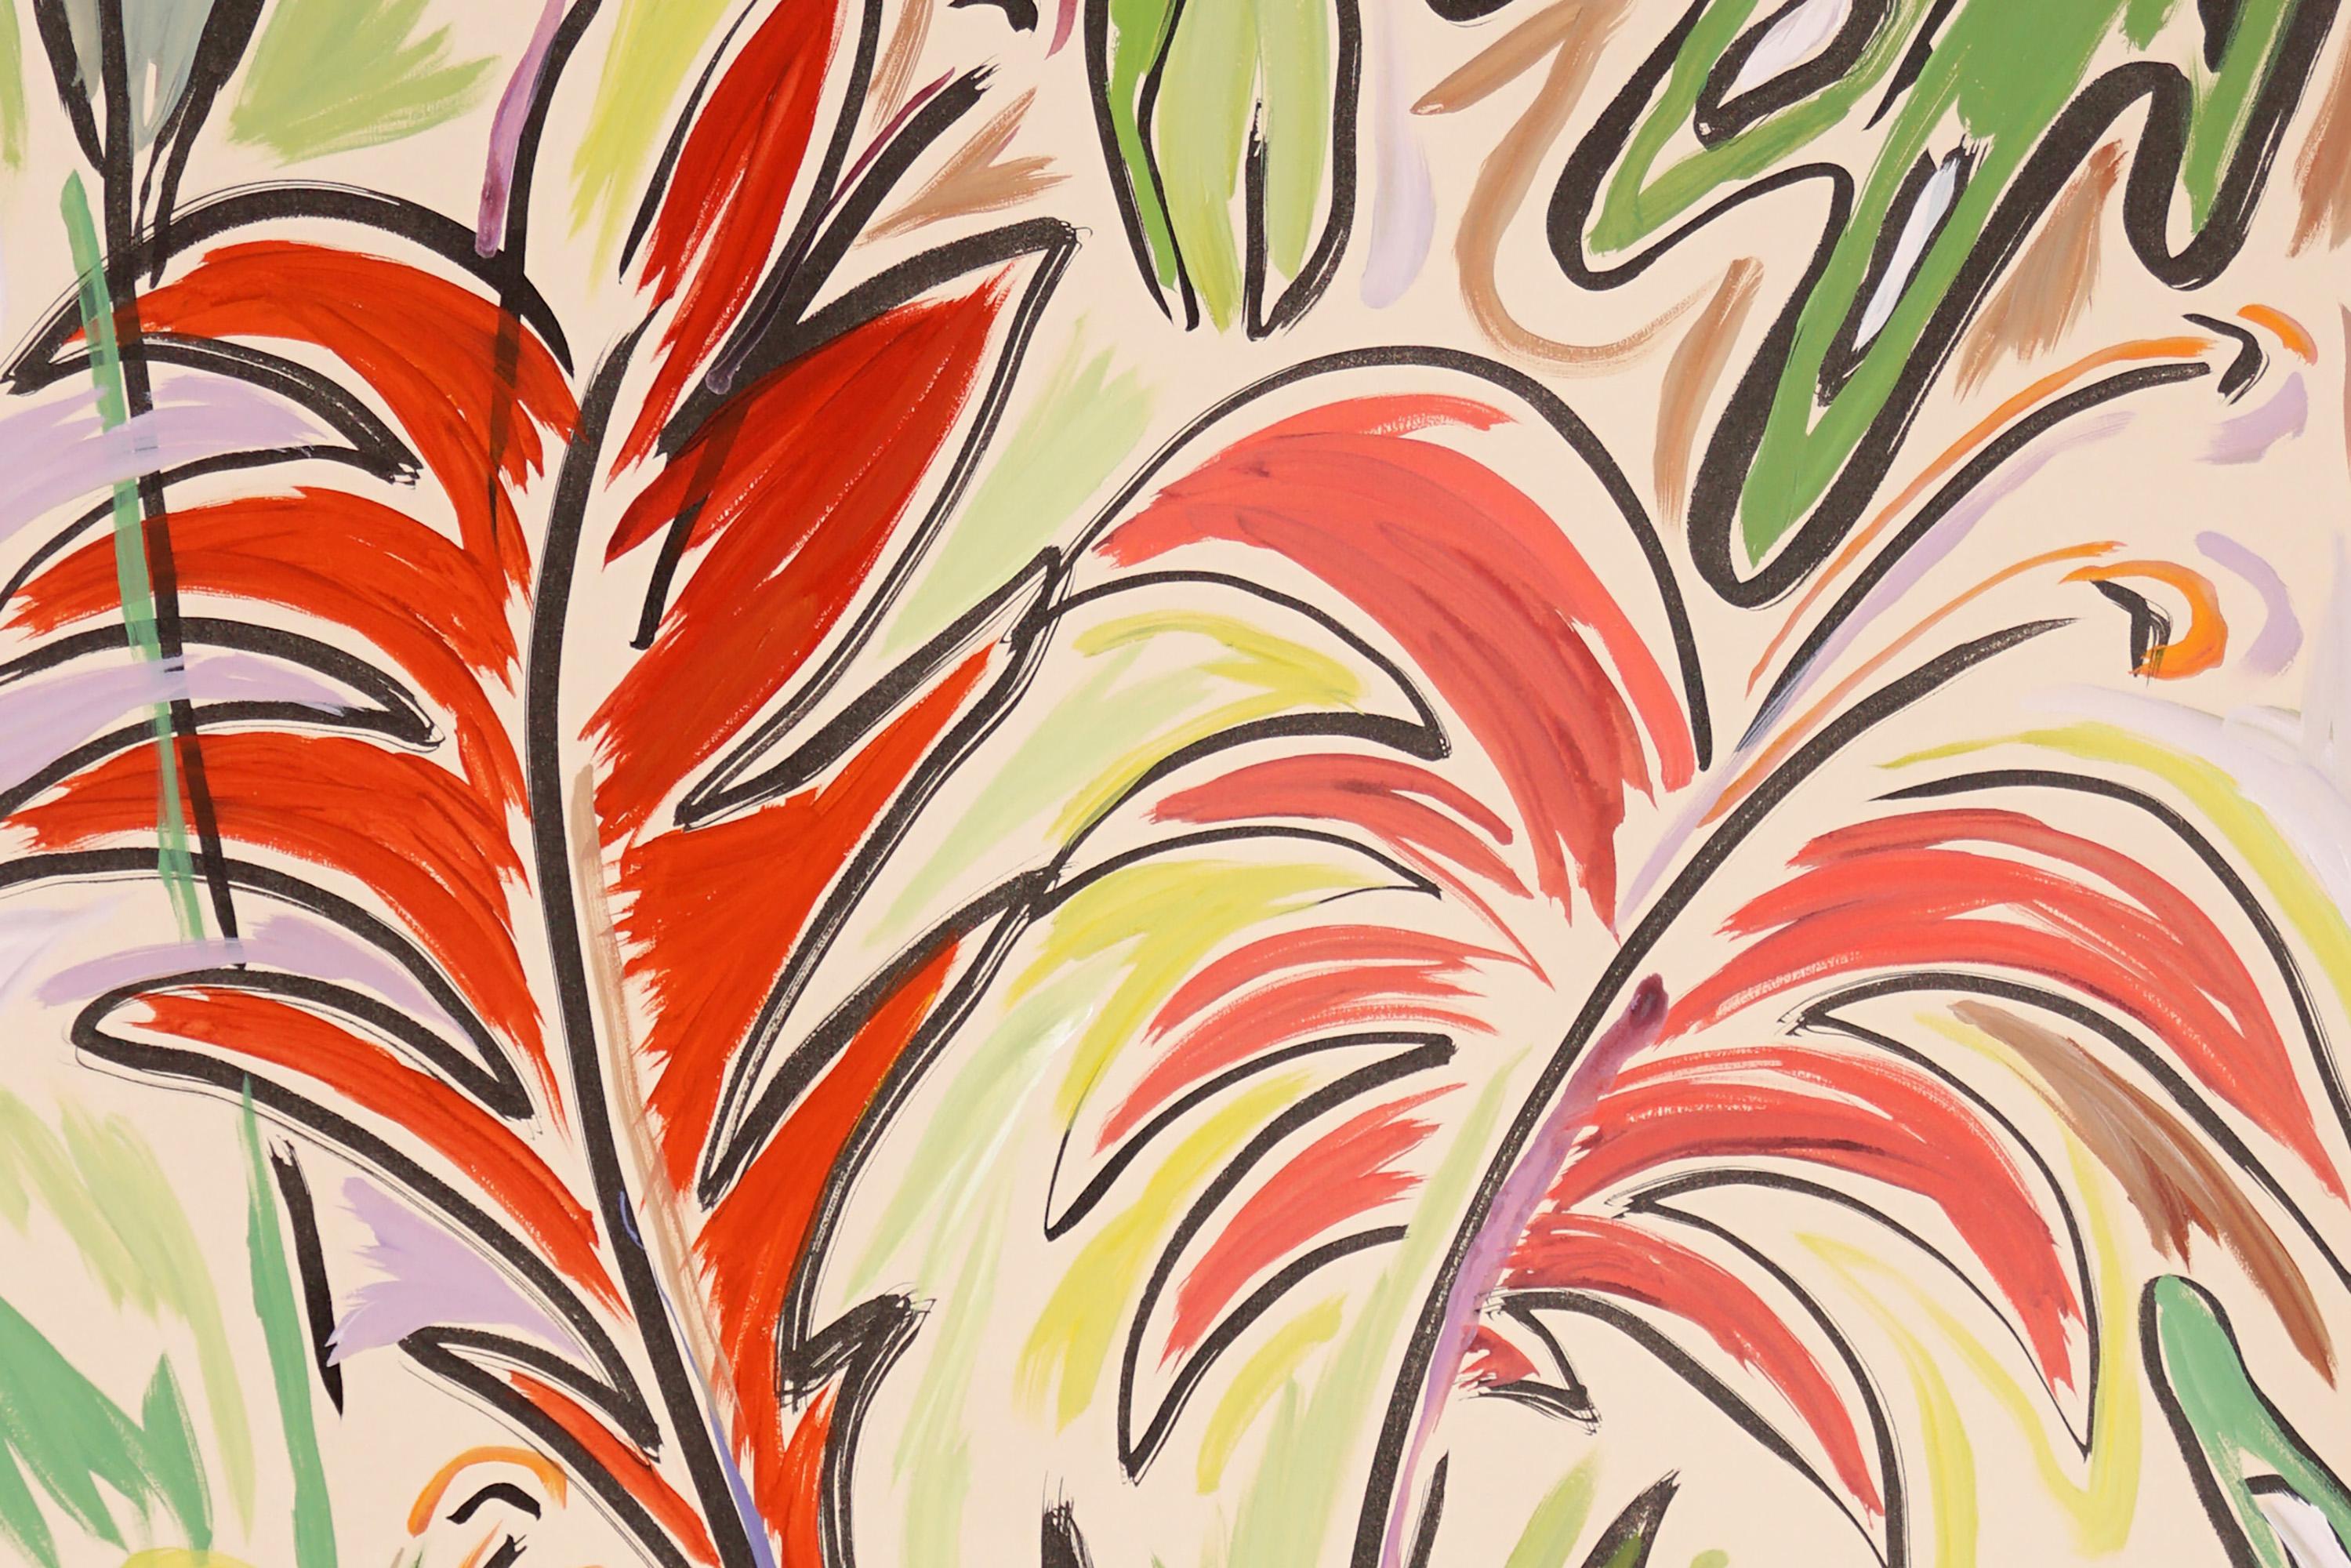 Tropical Garden, Red and Pink Flowers, Green Leaves, Jungle Inspiration Plants - Beige Abstract Painting by Romina Milano